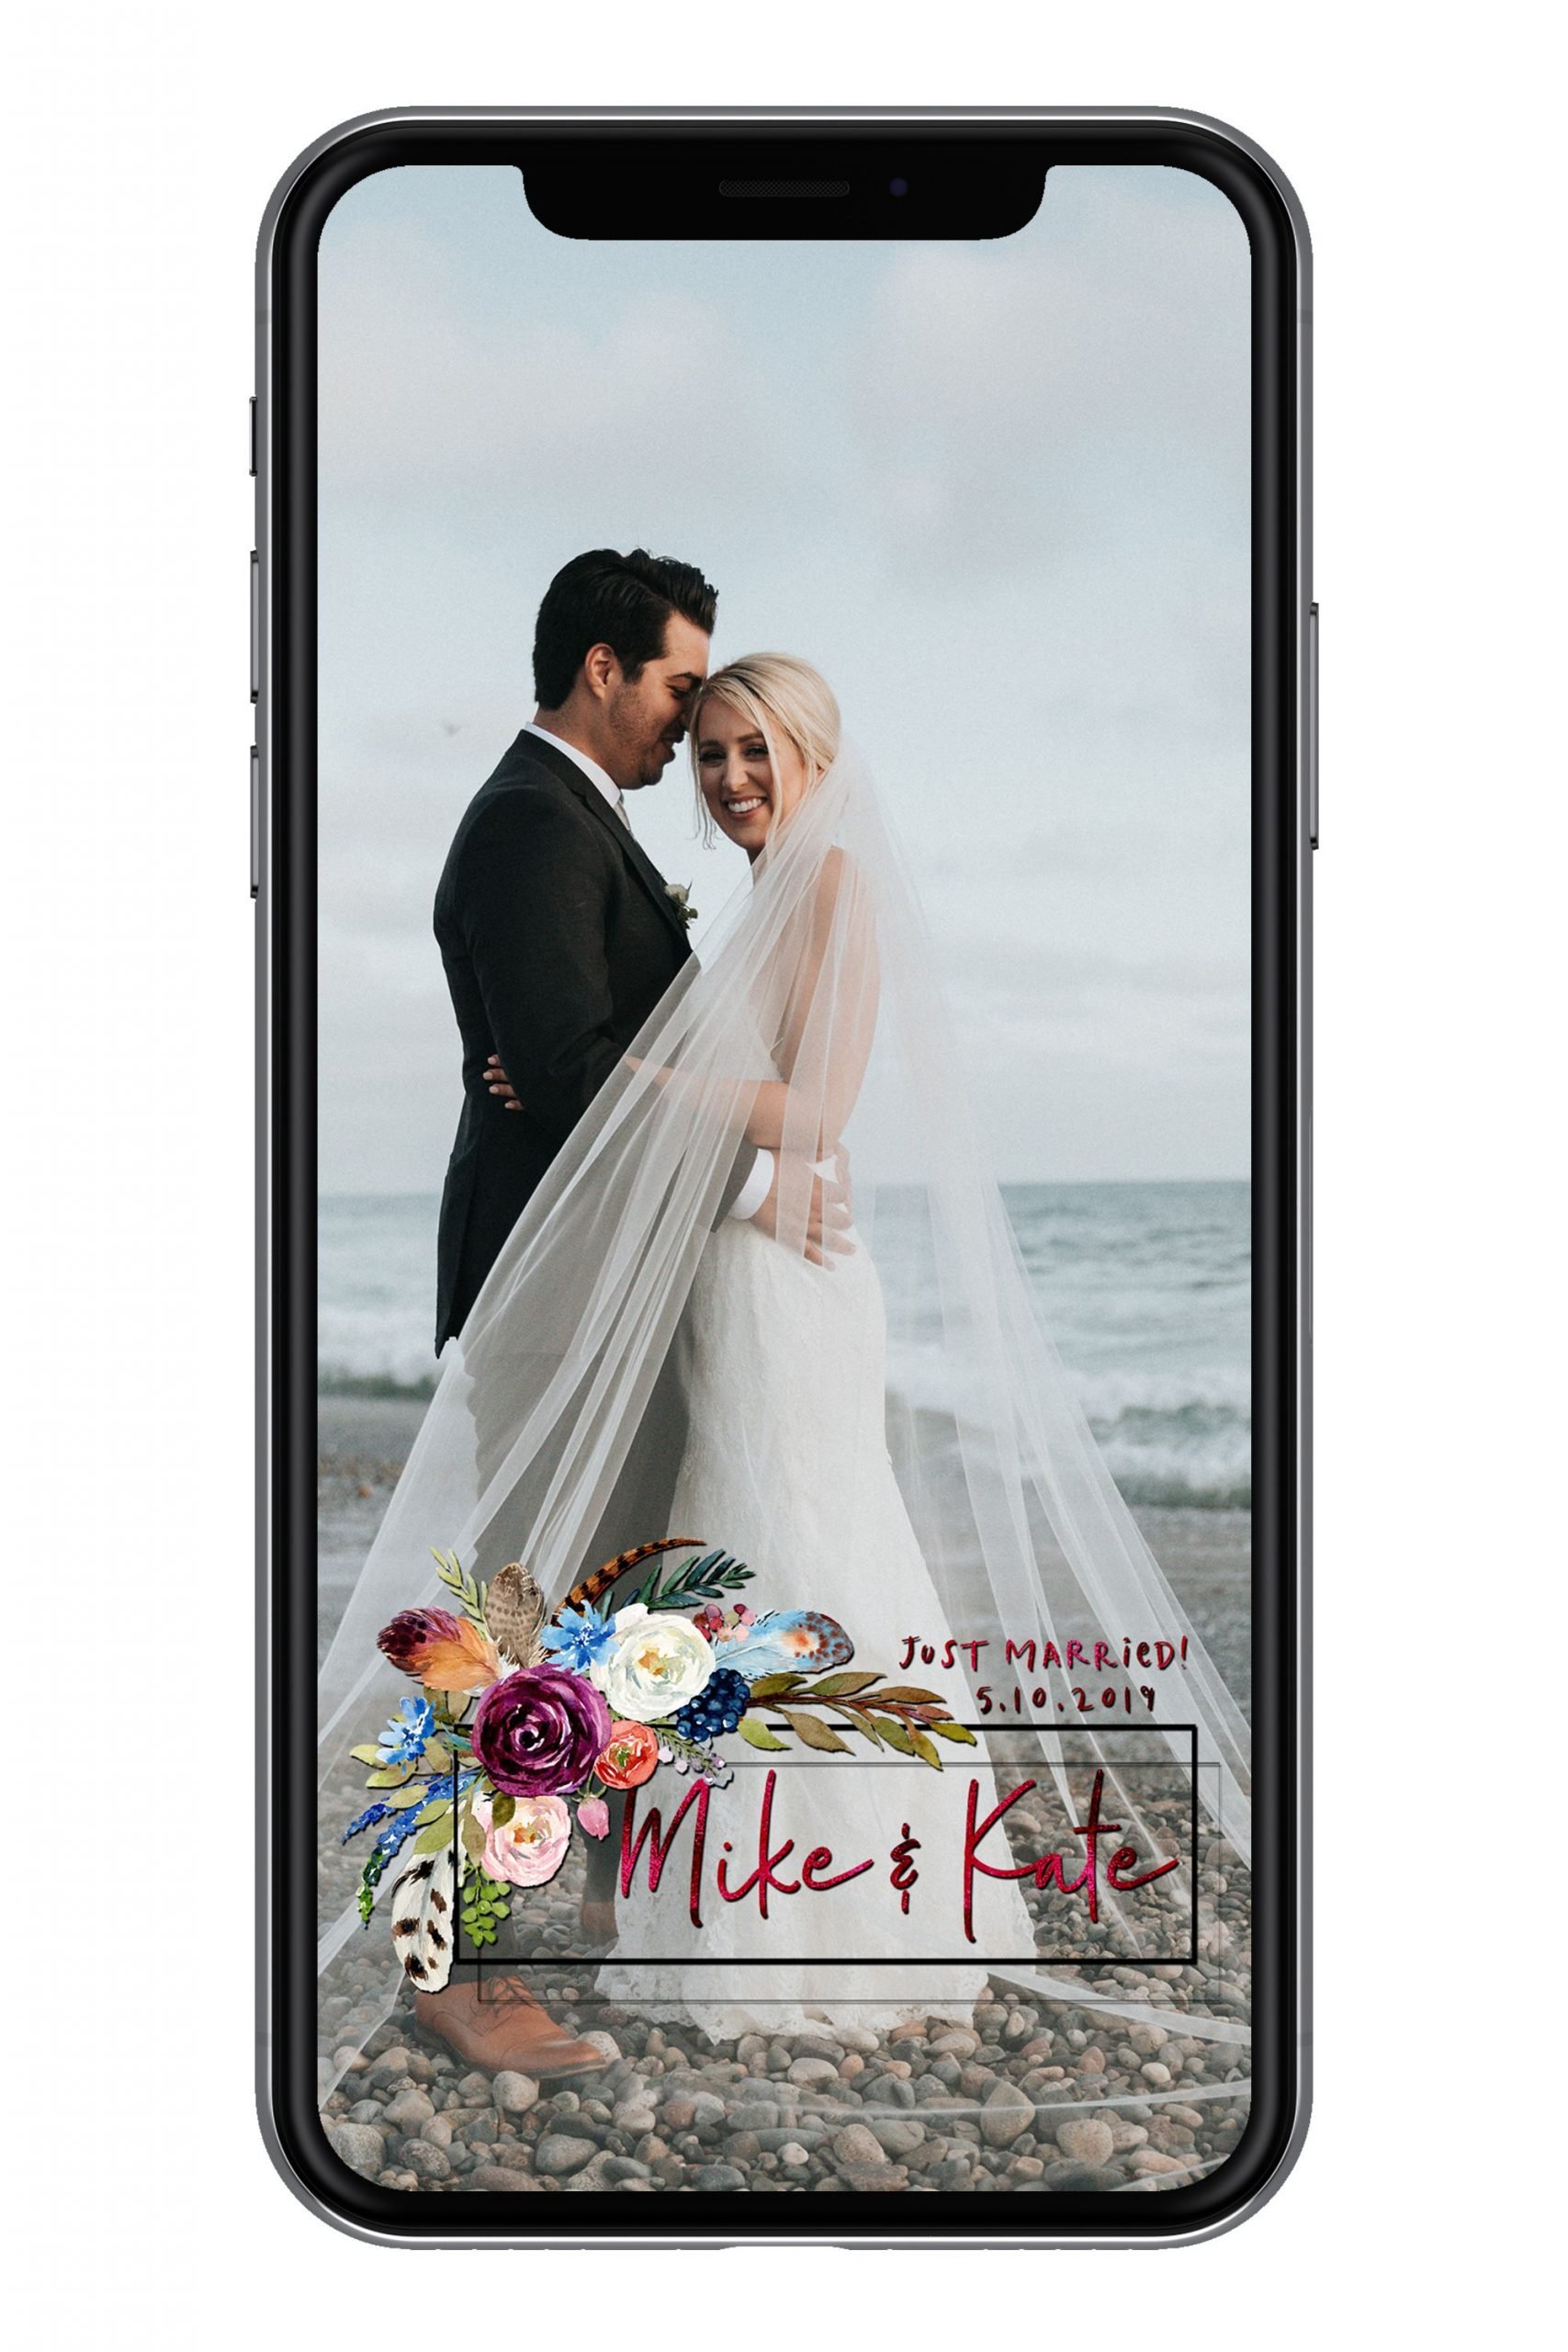 Wedding Floral Snapchat Filter, Snap Chat Geofilter ...